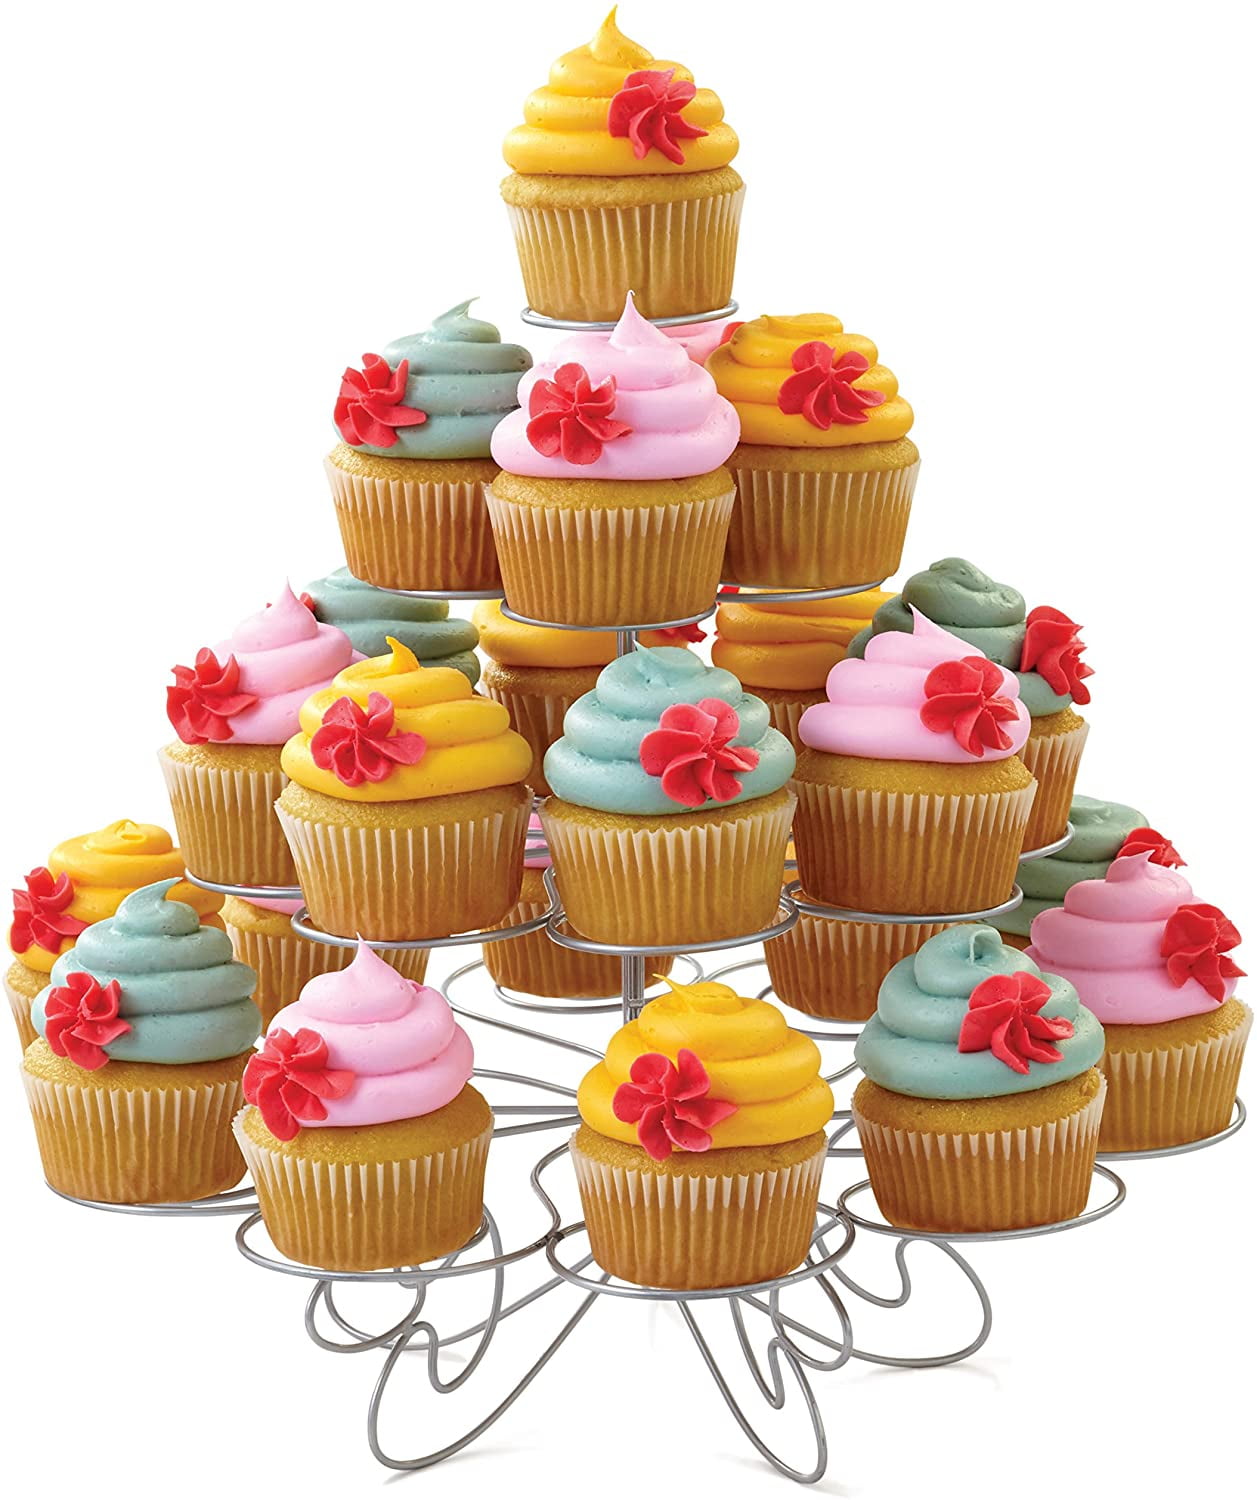 4 Tier Cupcake Stand Serve Up To 23 Delicious Homemade Cupcakes Space Saver 